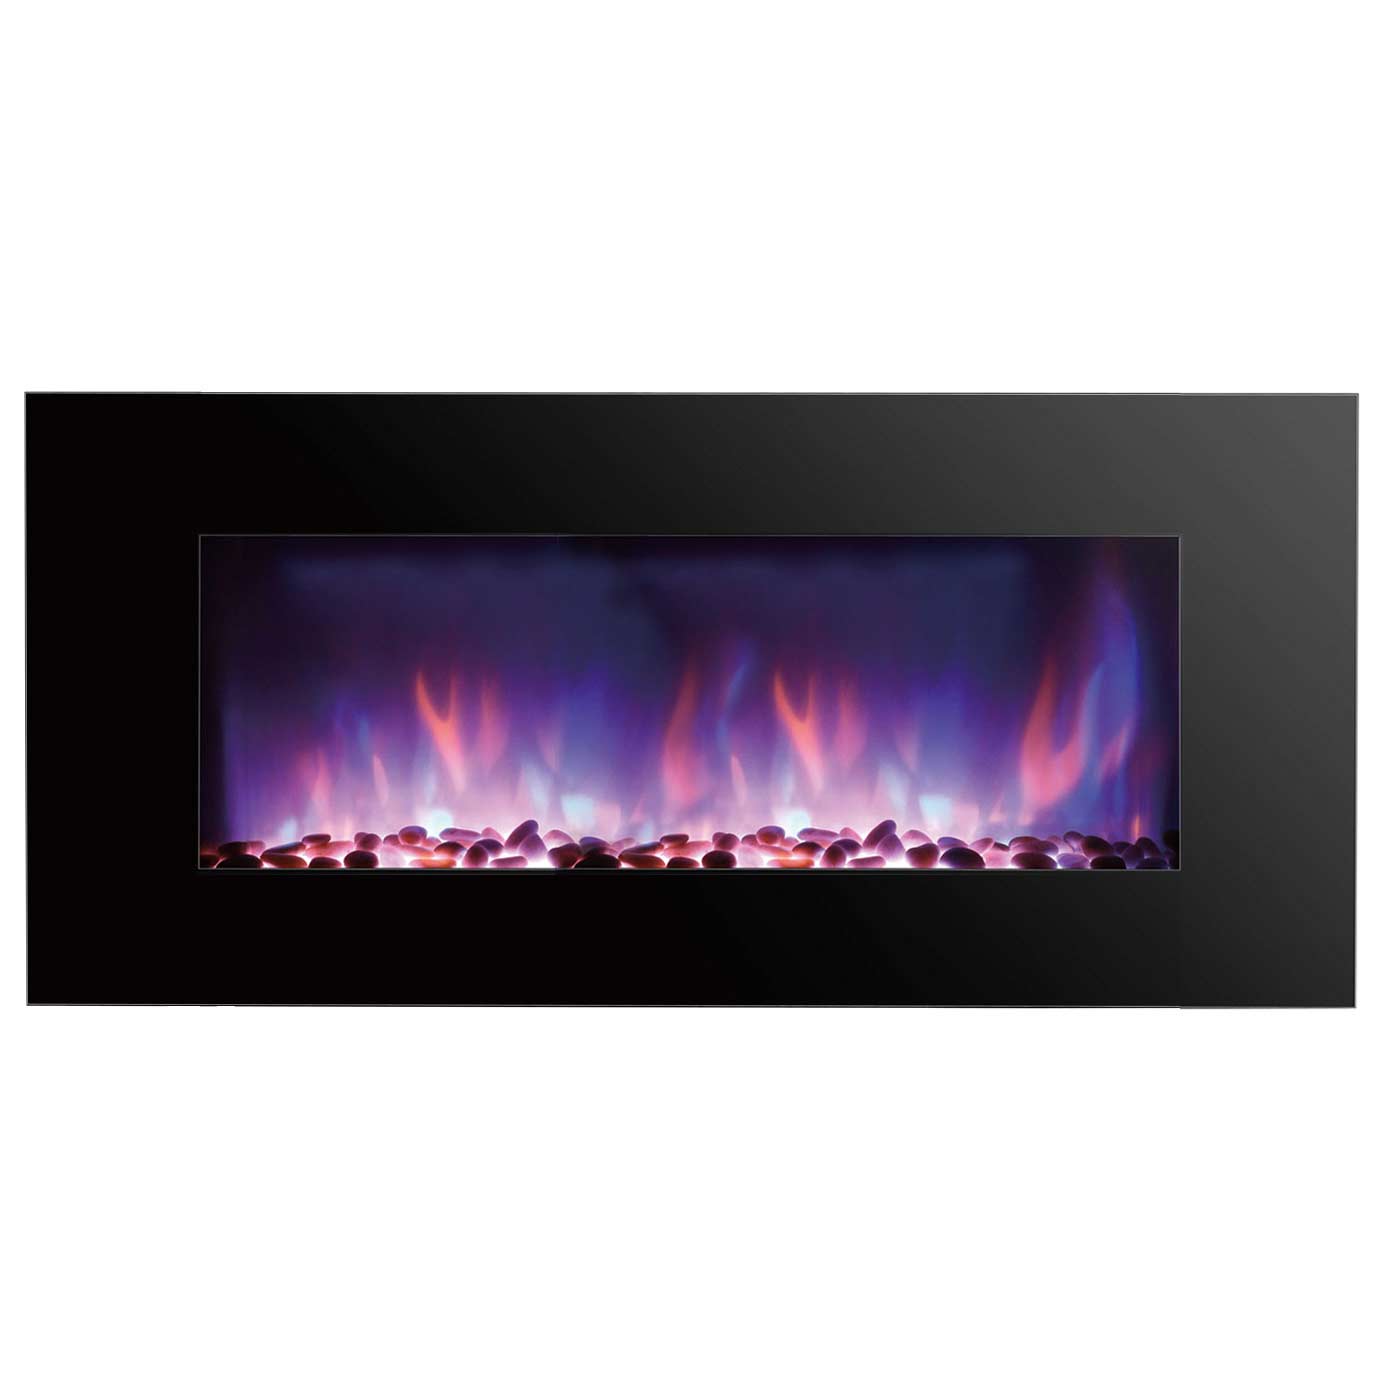 Color Changing 48"LONG SIZE WALL MOUNTED FIREPLACE WITH REMOTE CONTROL